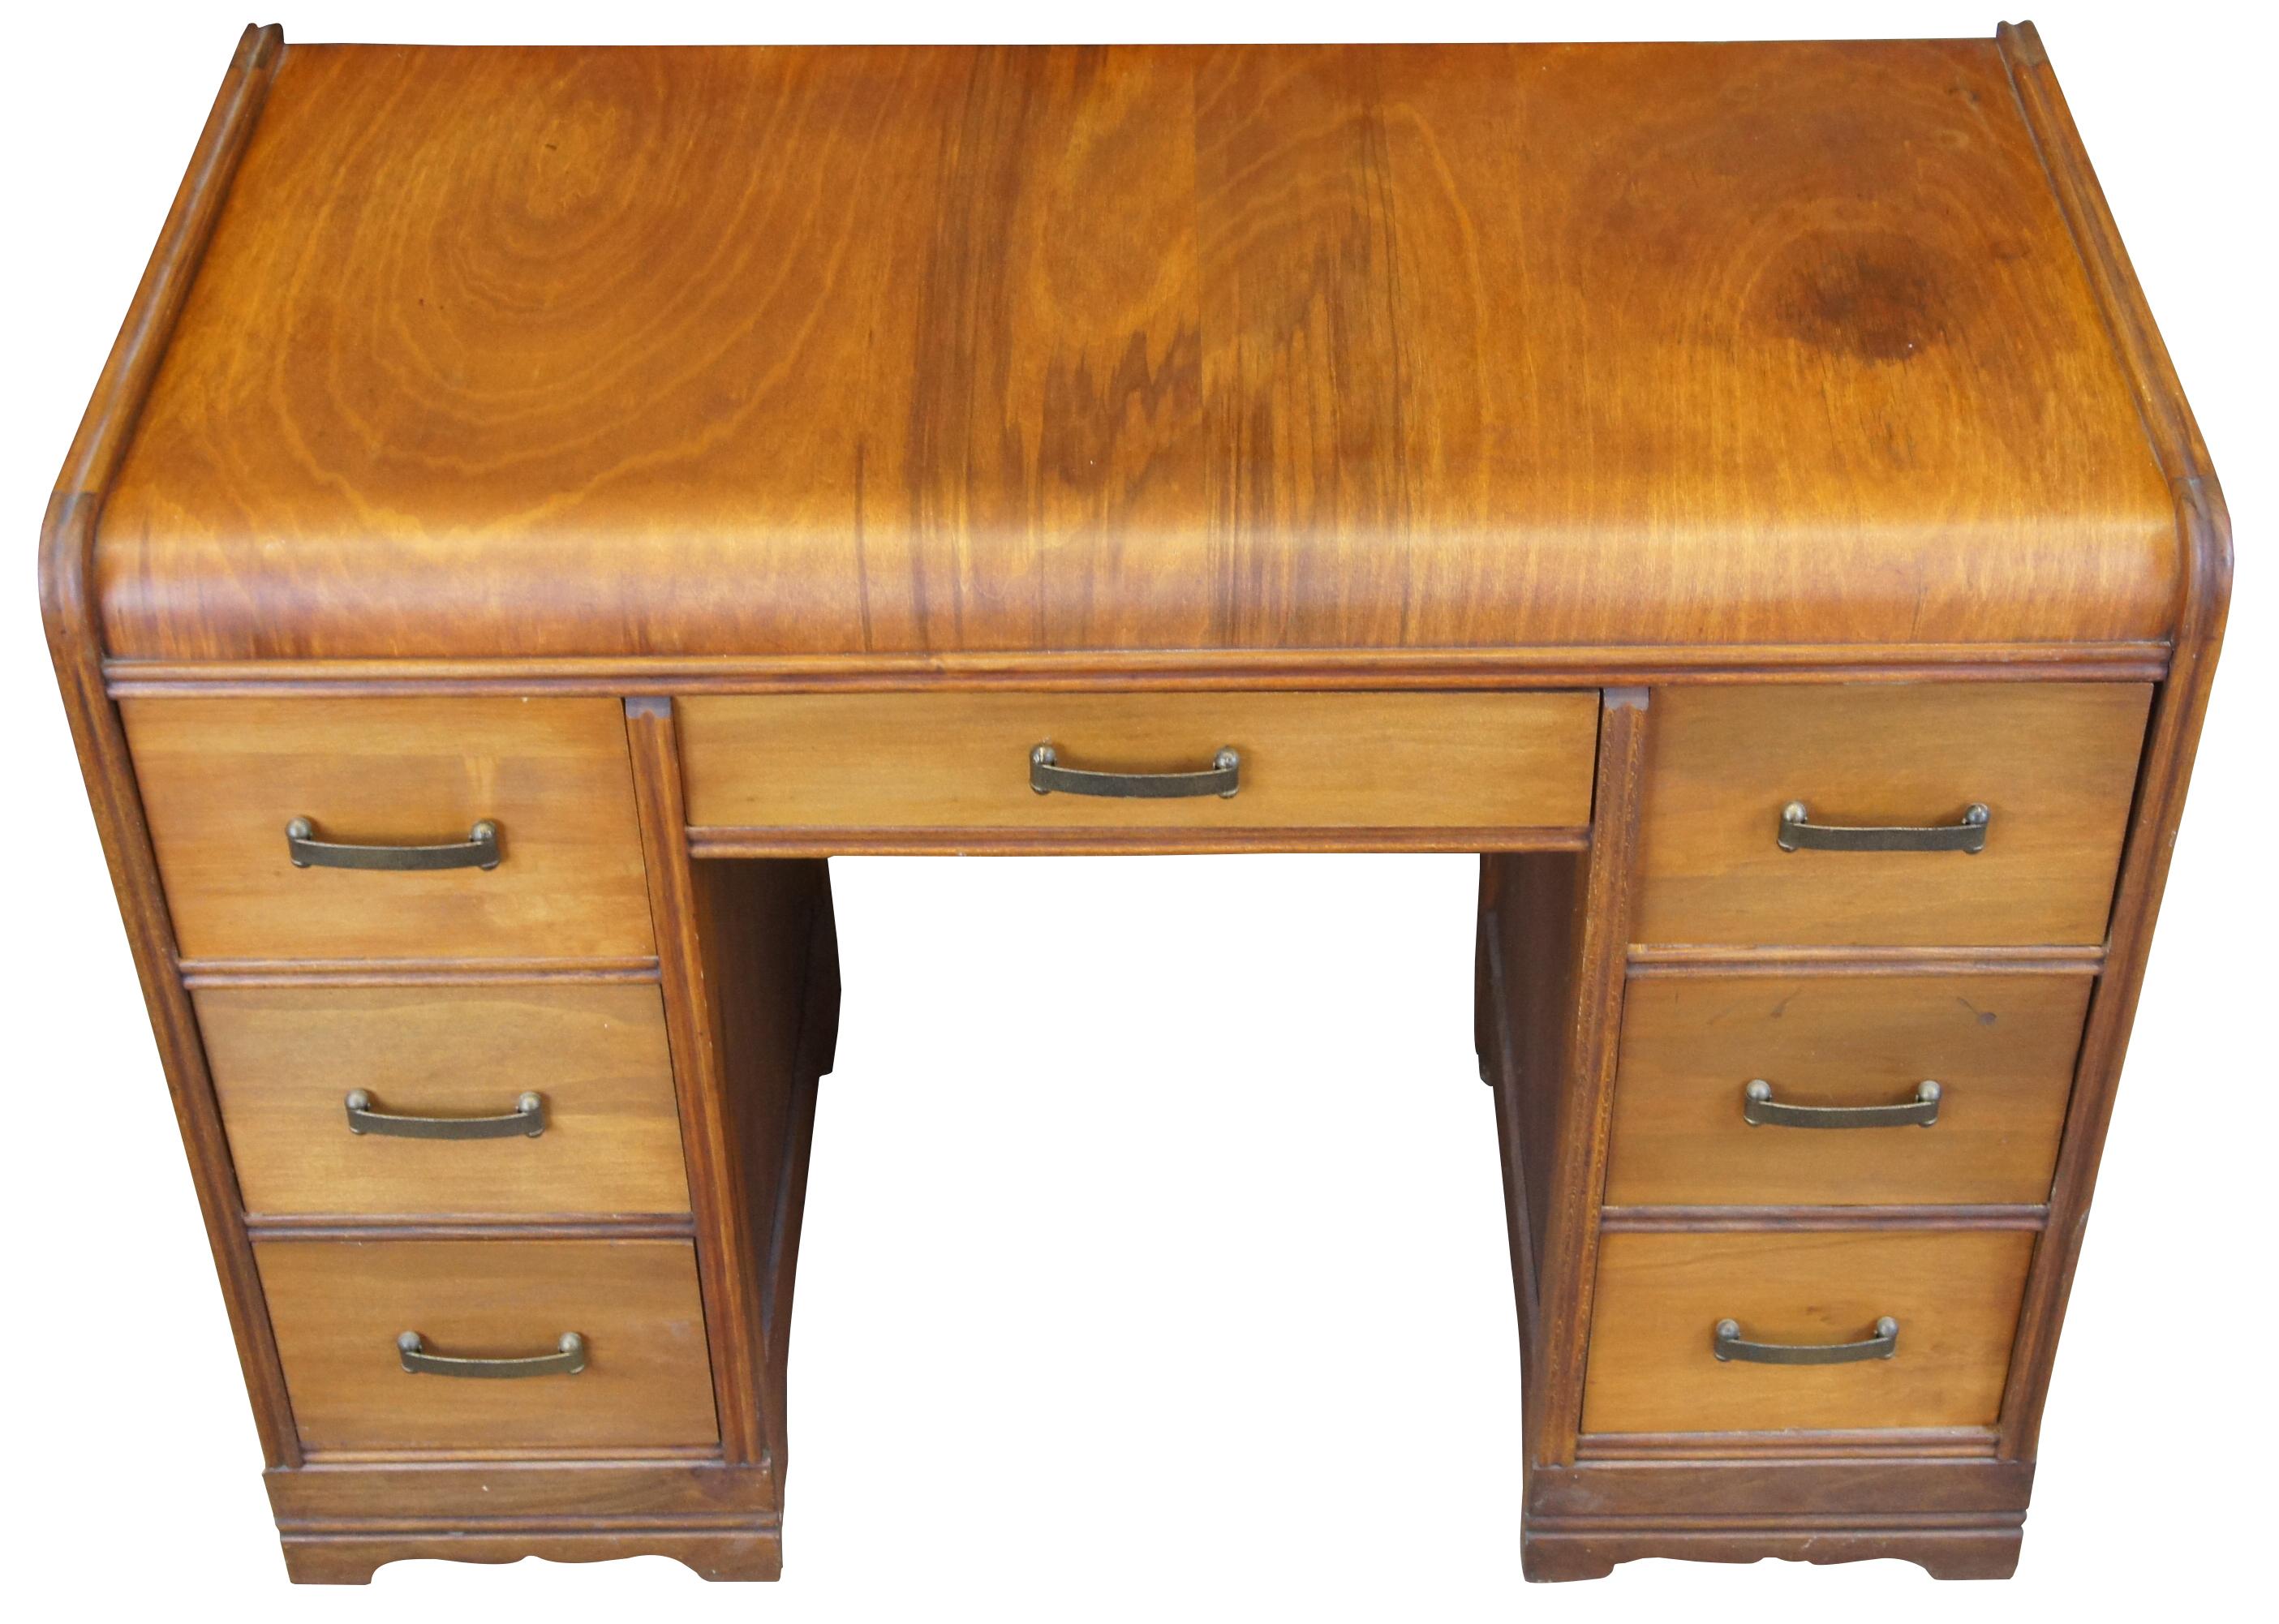 Antique American walnut Art Deco library desk. Features a waterfall front and seven dovetailed drawers with brass hardware.
        